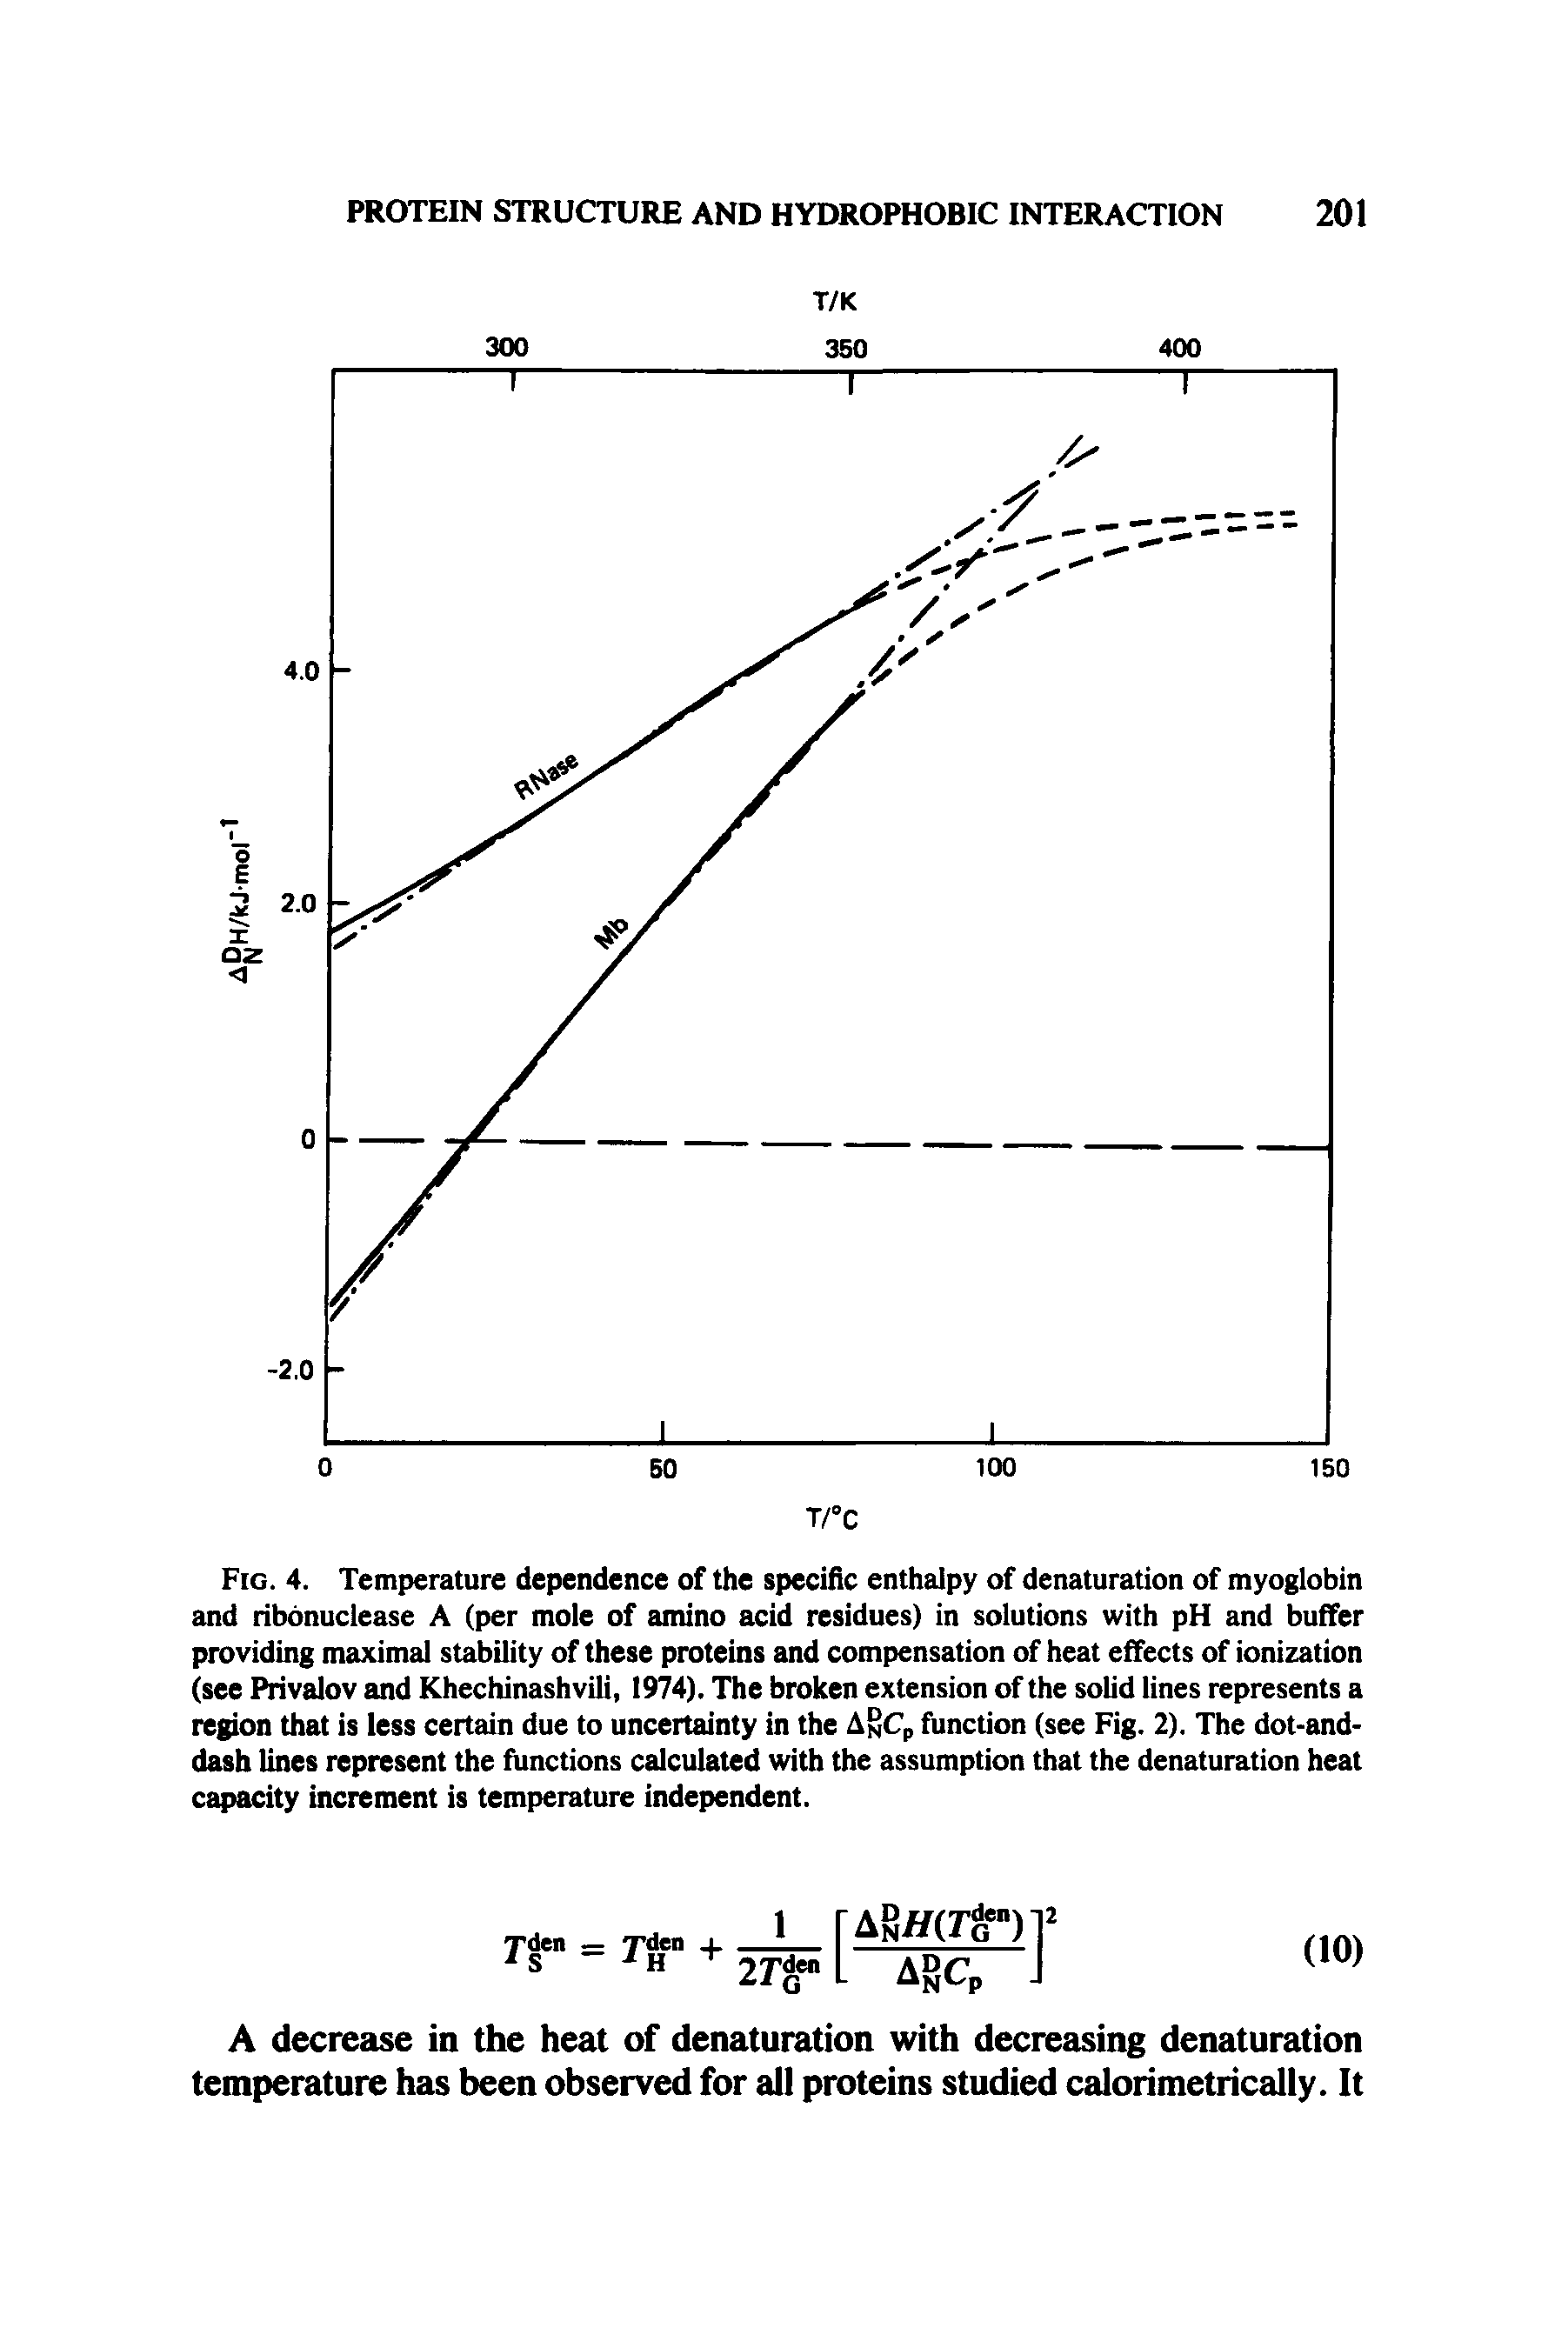 Fig. 4. Temperature dependence of the specific enthalpy of denaturation of myoglobin and ribonuclease A (per mole of amino acid residues) in solutions with pH and buffer providing maximal stability of these proteins and compensation of heat effects of ionization (see Privalov and Khechinashvili, 1974). The broken extension of the solid lines represents a region that is less certain due to uncertainty in the A°CP function (see Fig. 2). The dot-and-dash lines represent the functions calculated with the assumption that the denaturation heat capacity increment is temperature independent.